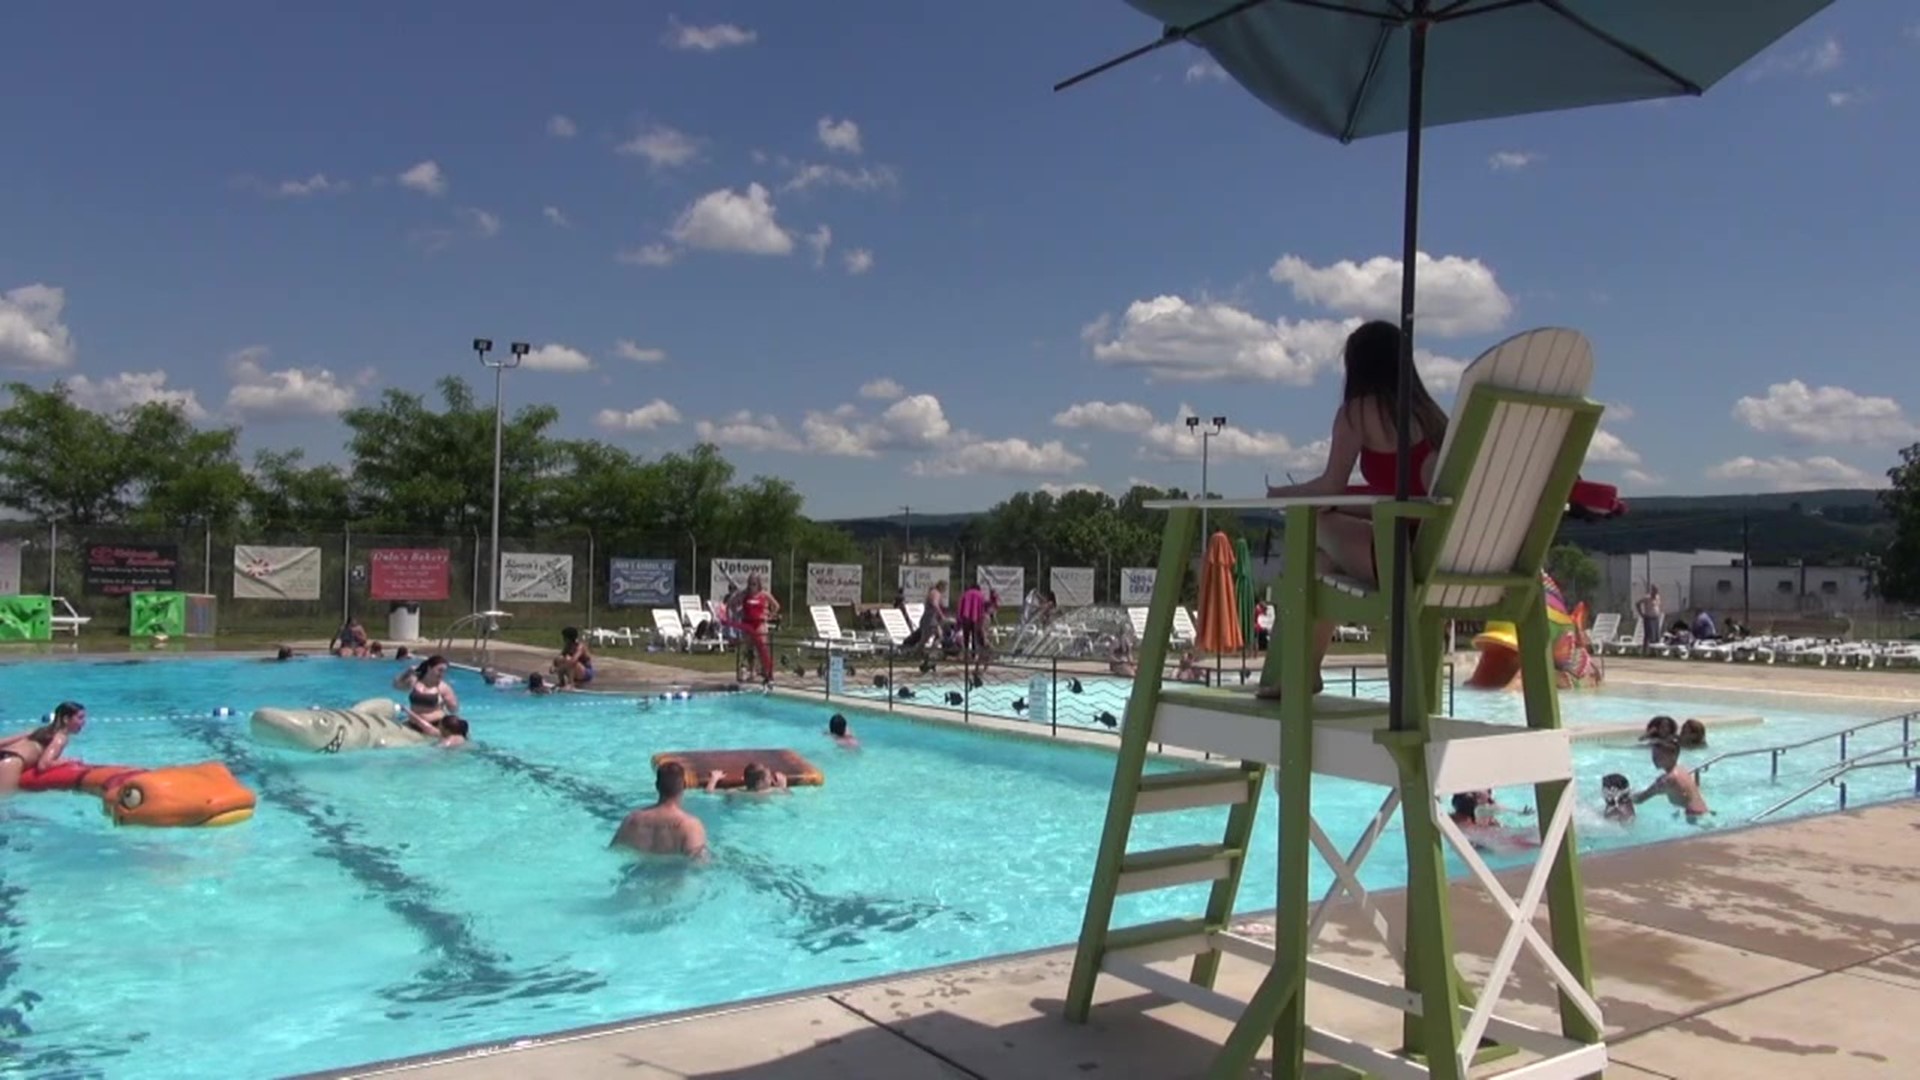 Despite other pools struggling to stay open or closing altogether, the pool in Columbia County continues to have a successful season each summer.